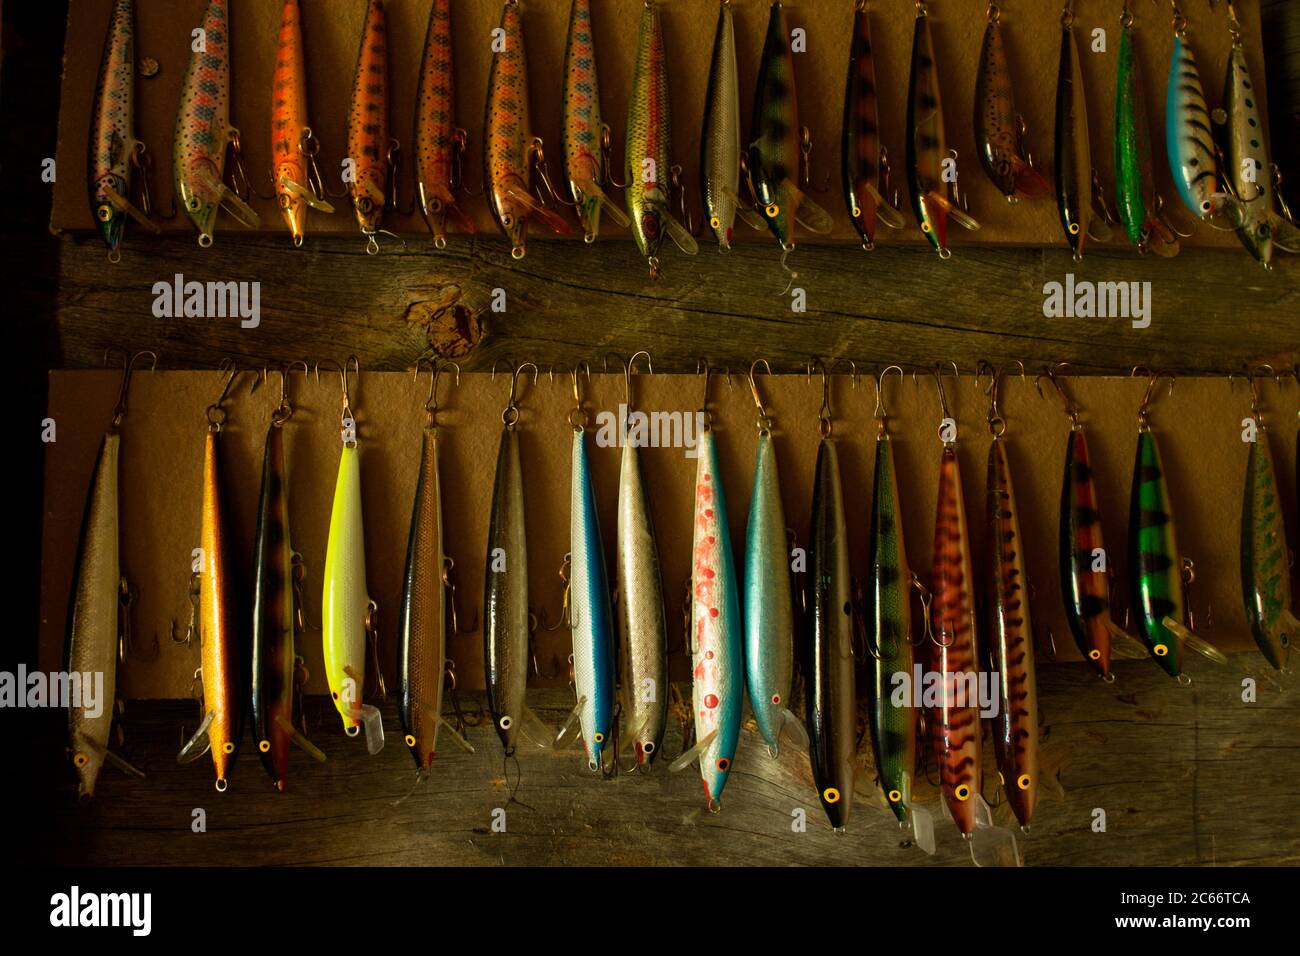 https://c8.alamy.com/comp/2C66TCA/colorful-fishing-lures-hanging-on-wall-lapland-finland-2C66TCA.jpg